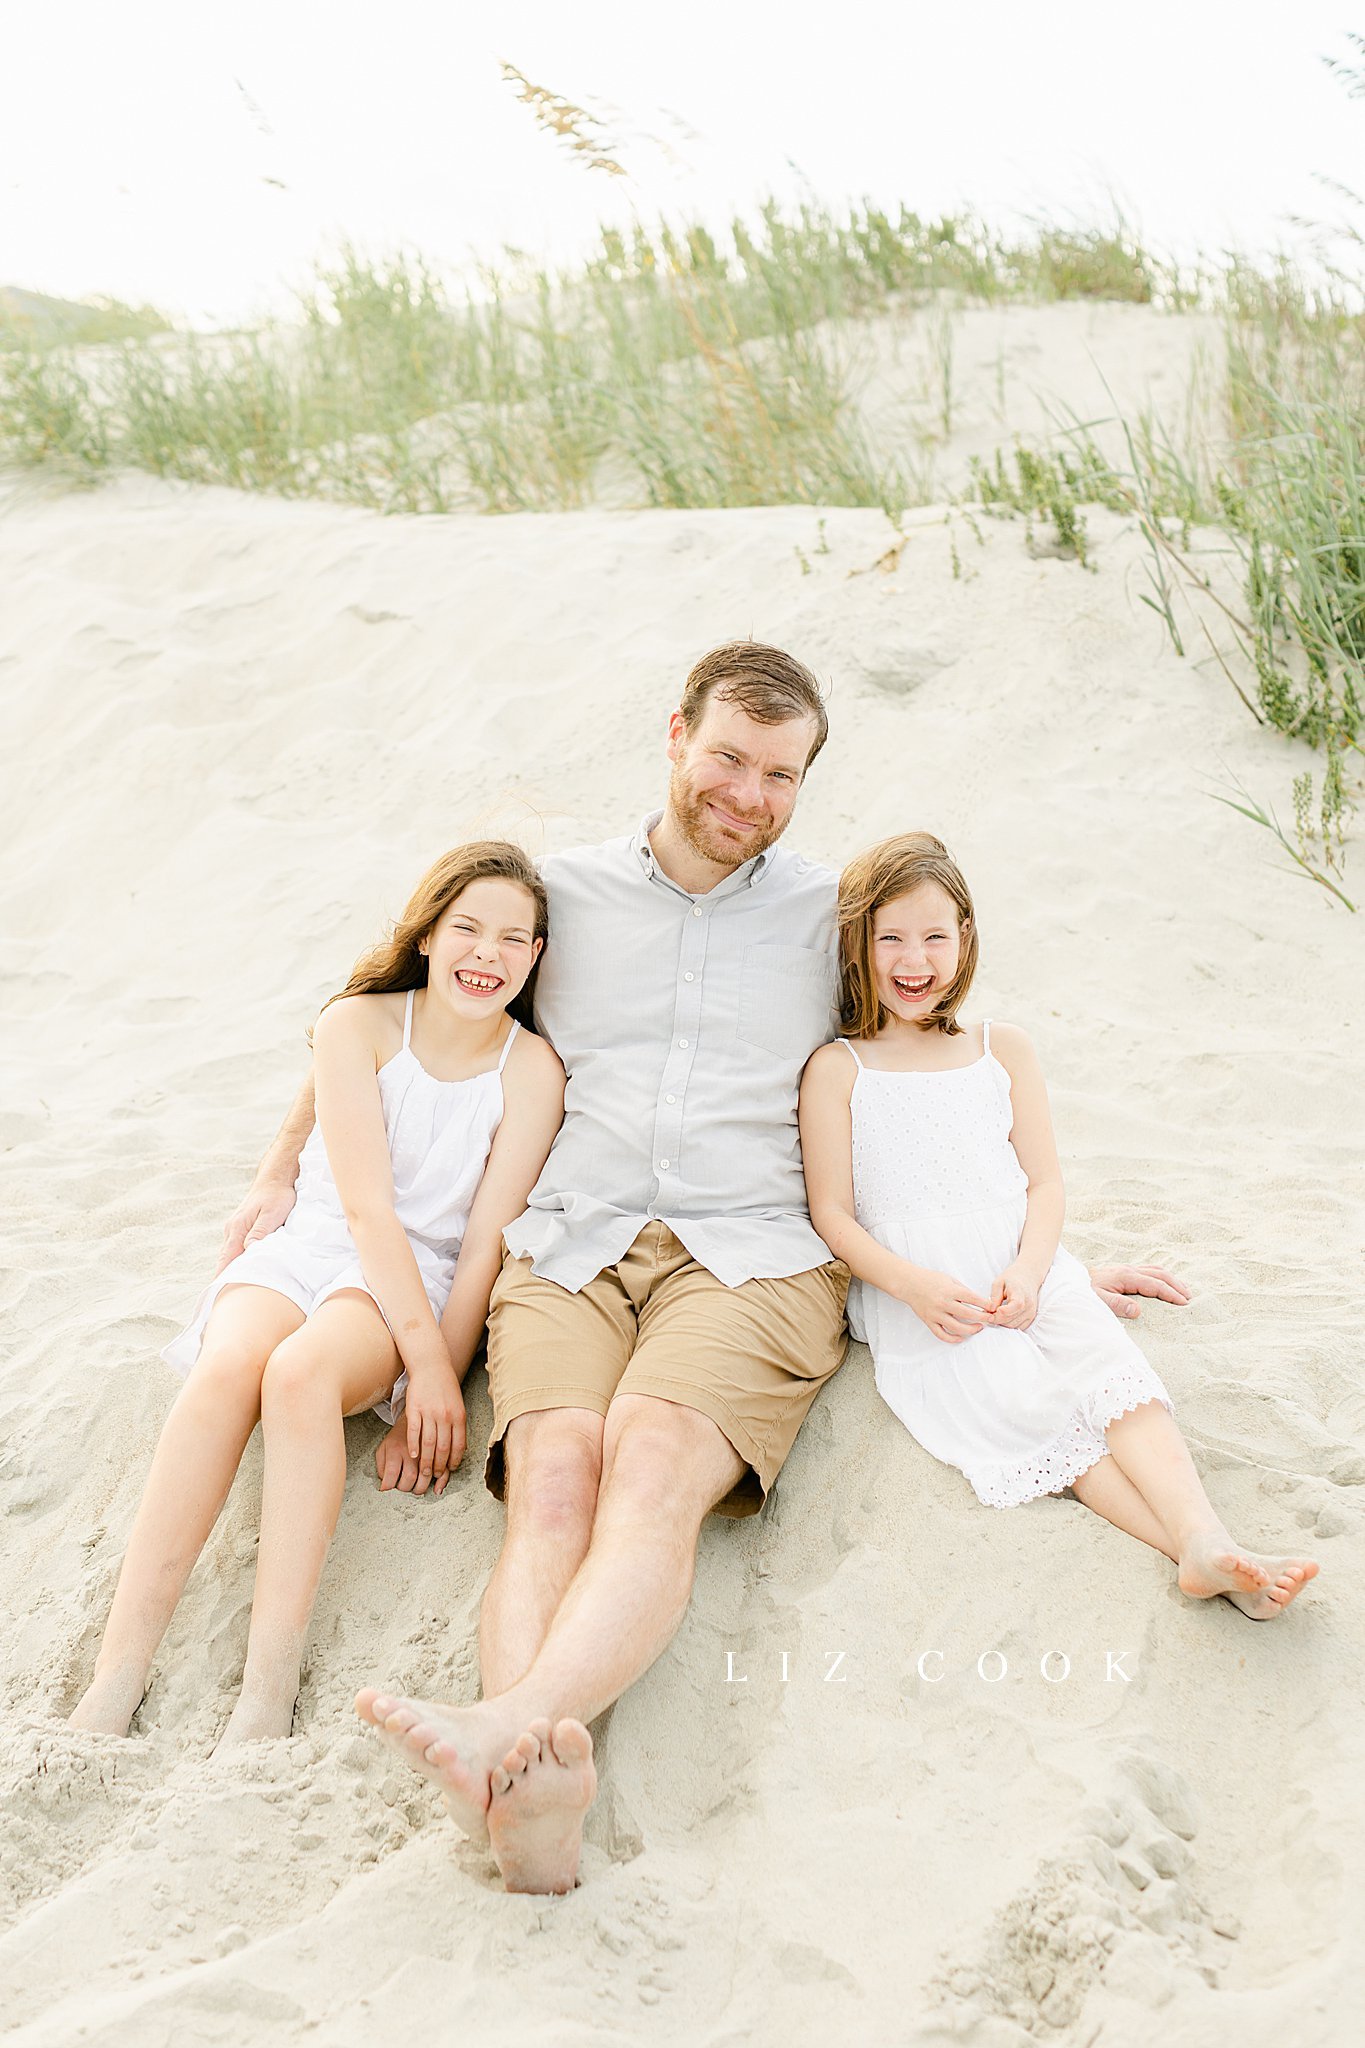 maternity-pictures-on-beach-liz-cook-photography-caroline-jean-photography_0013.jpg